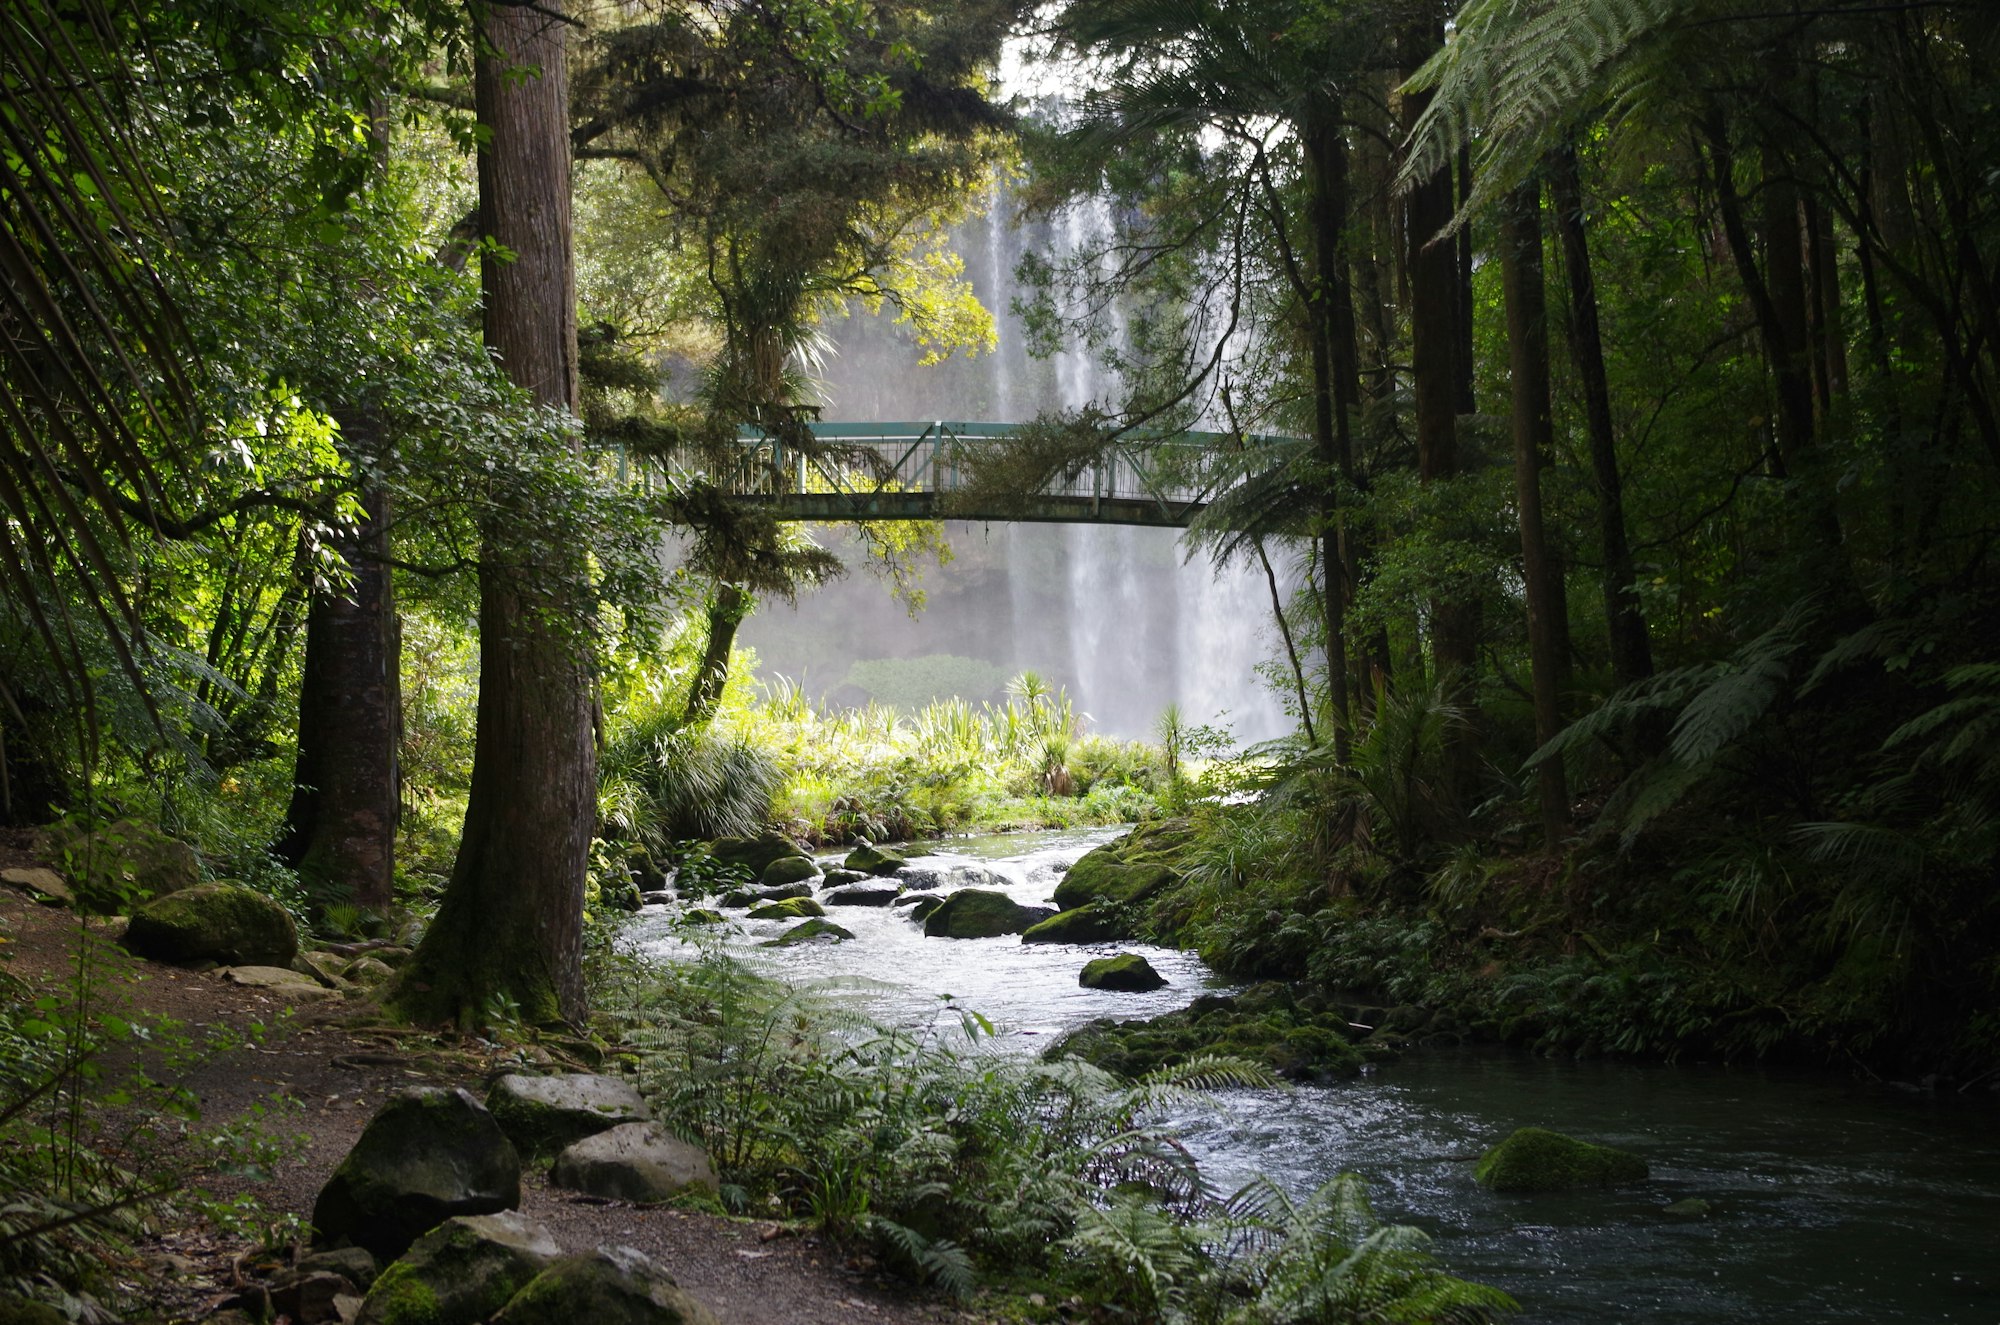 Bridge in the New Zealand forest